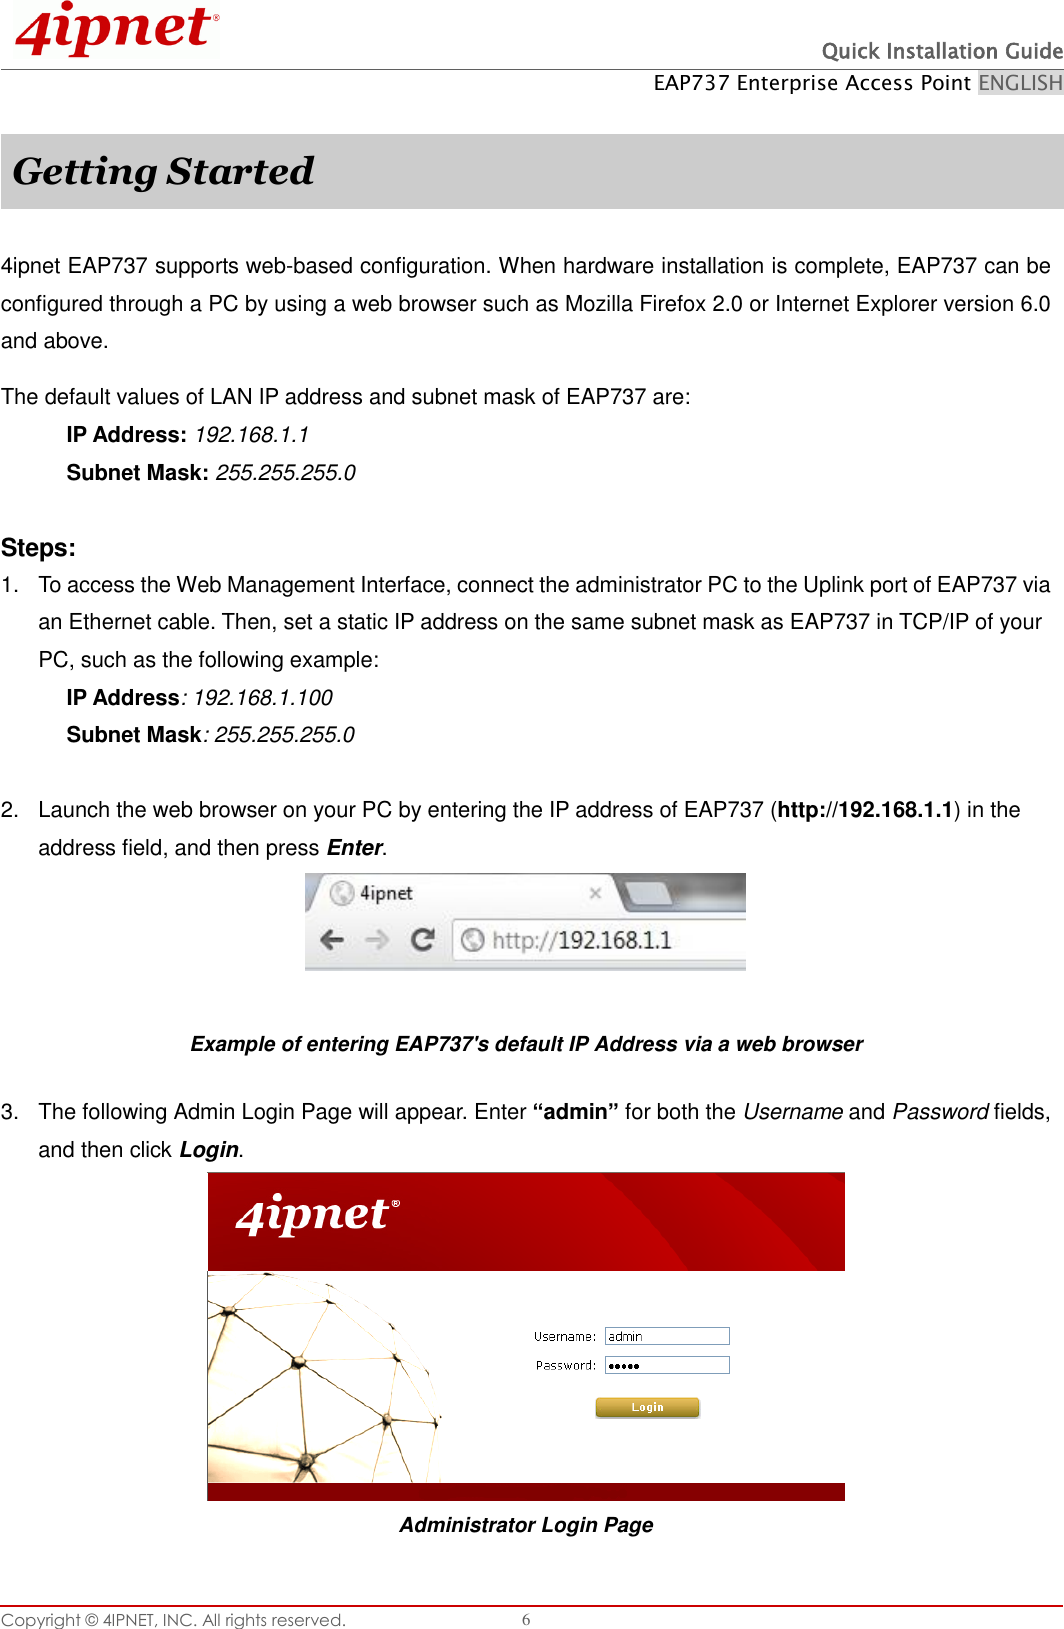  Quick Installation Guide EAP737 Enterprise Access Point ENGLISH Copyright ©  4IPNET, INC. All rights reserved.   6  Getting Started  4ipnet EAP737 supports web-based configuration. When hardware installation is complete, EAP737 can be configured through a PC by using a web browser such as Mozilla Firefox 2.0 or Internet Explorer version 6.0 and above. The default values of LAN IP address and subnet mask of EAP737 are: IP Address: 192.168.1.1 Subnet Mask: 255.255.255.0    Steps: 1.  To access the Web Management Interface, connect the administrator PC to the Uplink port of EAP737 via an Ethernet cable. Then, set a static IP address on the same subnet mask as EAP737 in TCP/IP of your PC, such as the following example: IP Address: 192.168.1.100 Subnet Mask: 255.255.255.0    2.  Launch the web browser on your PC by entering the IP address of EAP737 (http://192.168.1.1) in the address field, and then press Enter.   Example of entering EAP737&apos;s default IP Address via a web browser 3.  The following Admin Login Page will appear. Enter “admin” for both the Username and Password fields, and then click Login.  Administrator Login Page 